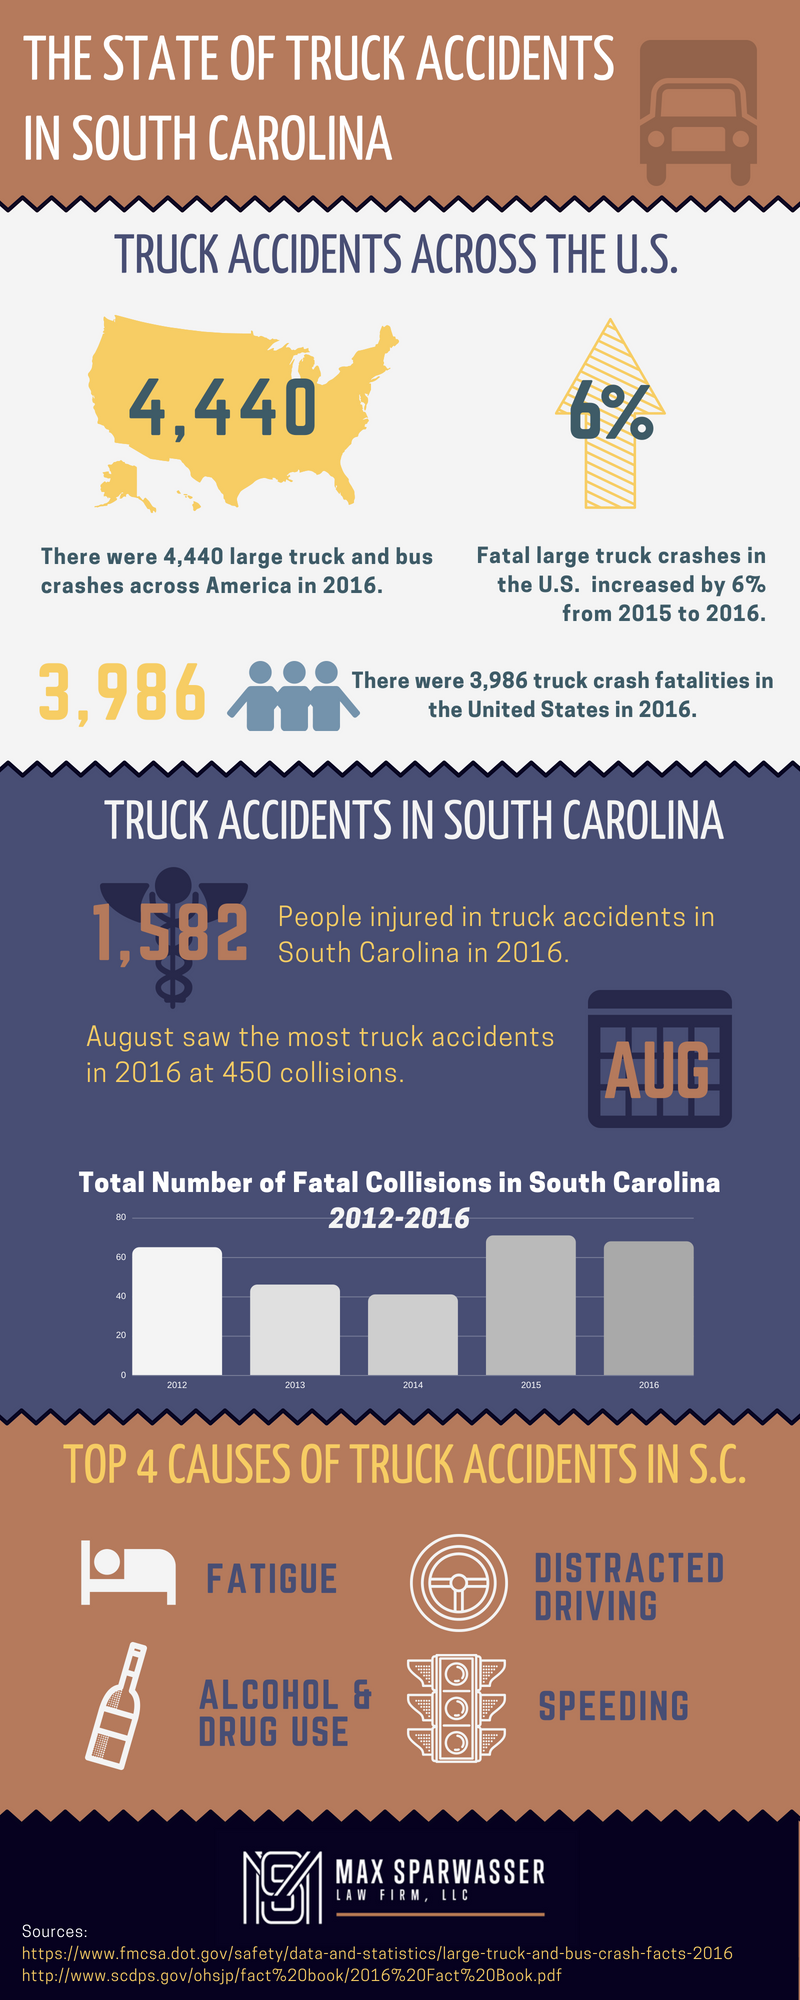 The State of Truck Accidents in South Carolina Infographic